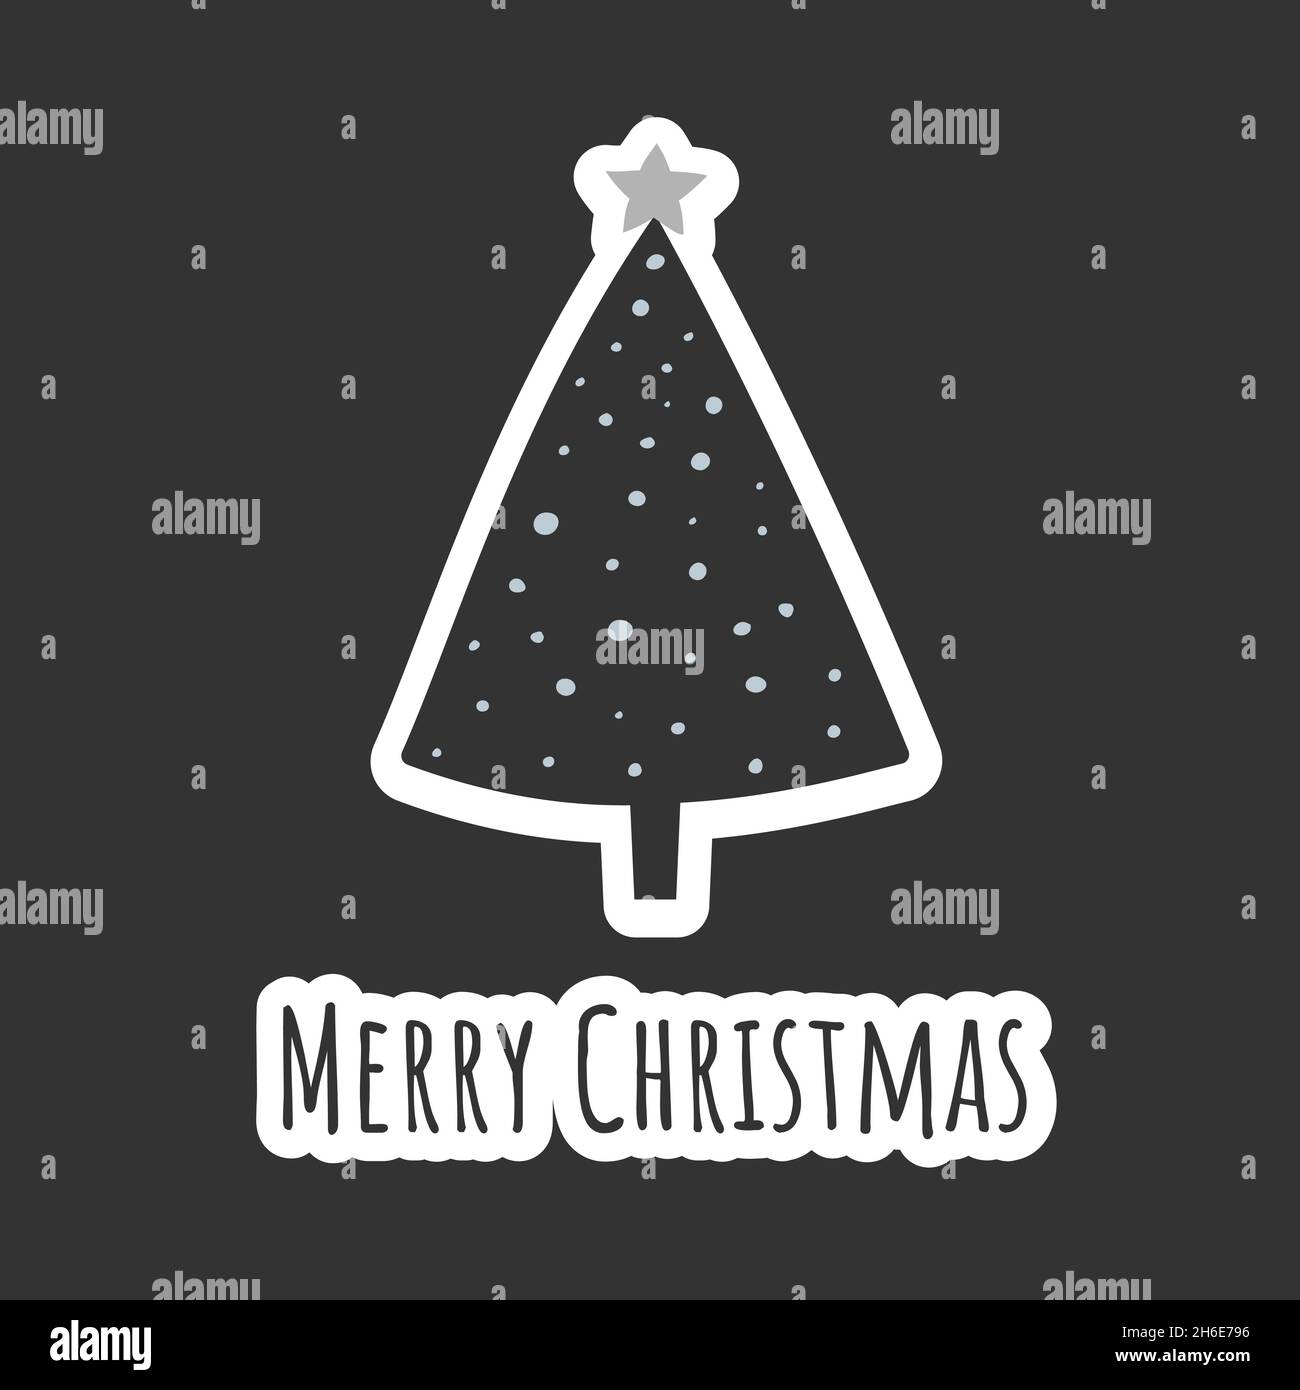 square dark Christmas Card template with Christmas tree, vector illustration Stock Vector